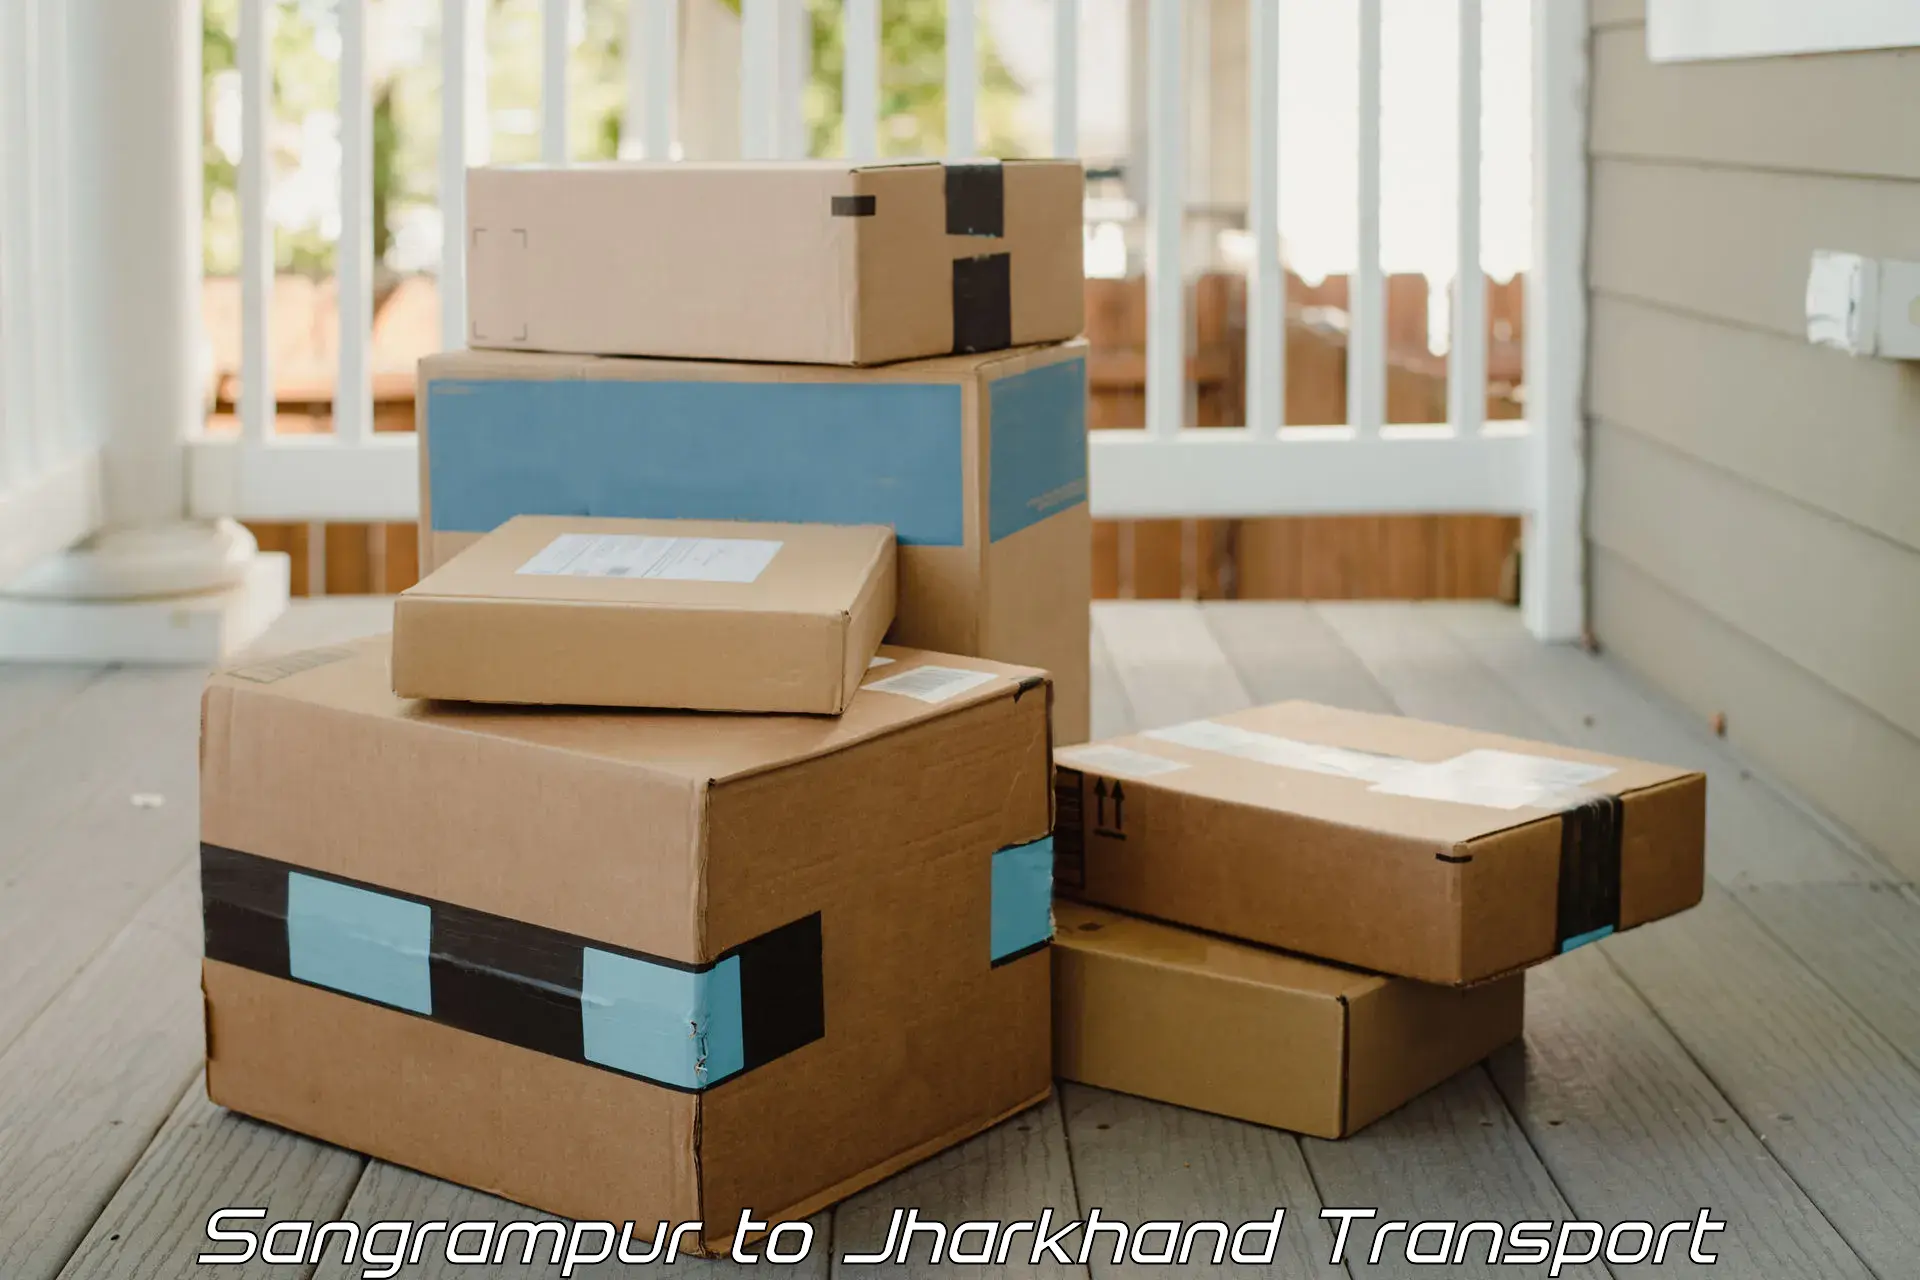 Air freight transport services Sangrampur to Jharkhand